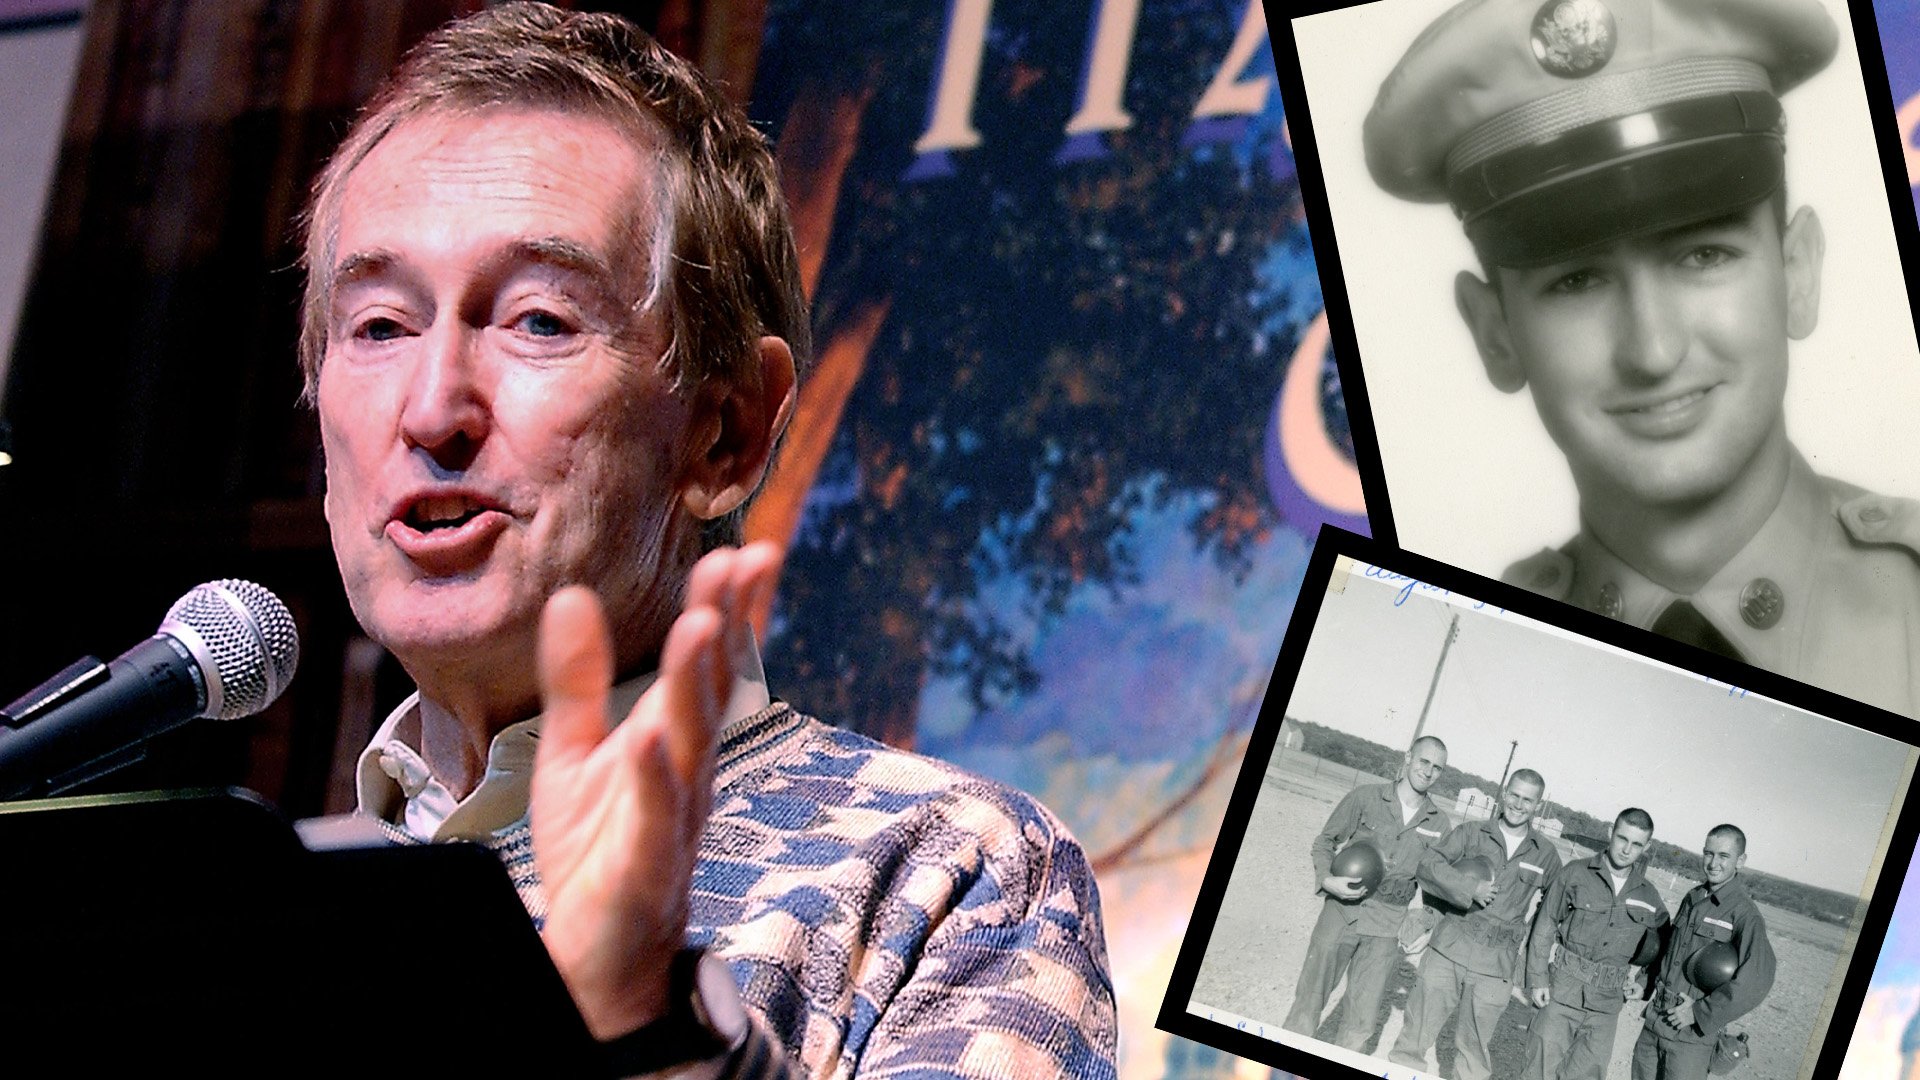 Bob McGrath, the longtime star of "Sesame Street," died Sunday, Dec. 4, in his home in Norwood, New Jersey, while recovering from a recent stroke. He was 90 and always pointed to his US Army service during the Cold War for launching his career in music and television. Coffee or Die Magazine composite.